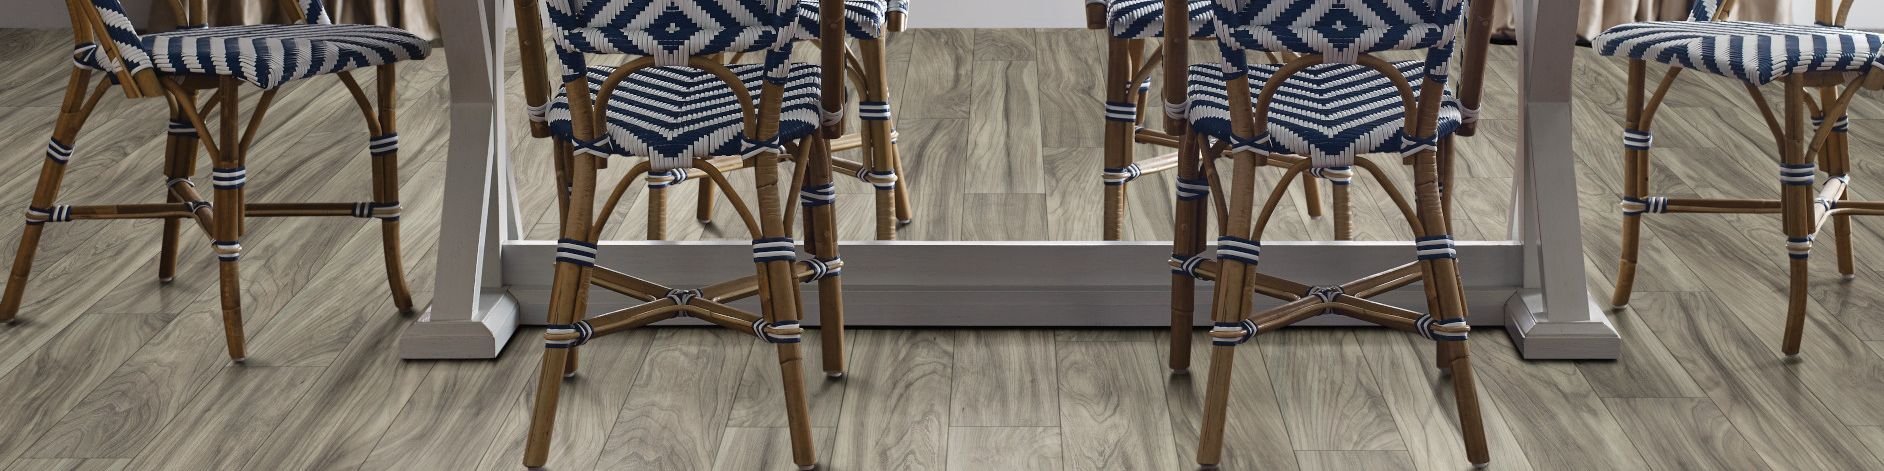 woven dining chairs around a dining table - Young's Interiors & Flooring in Ford City